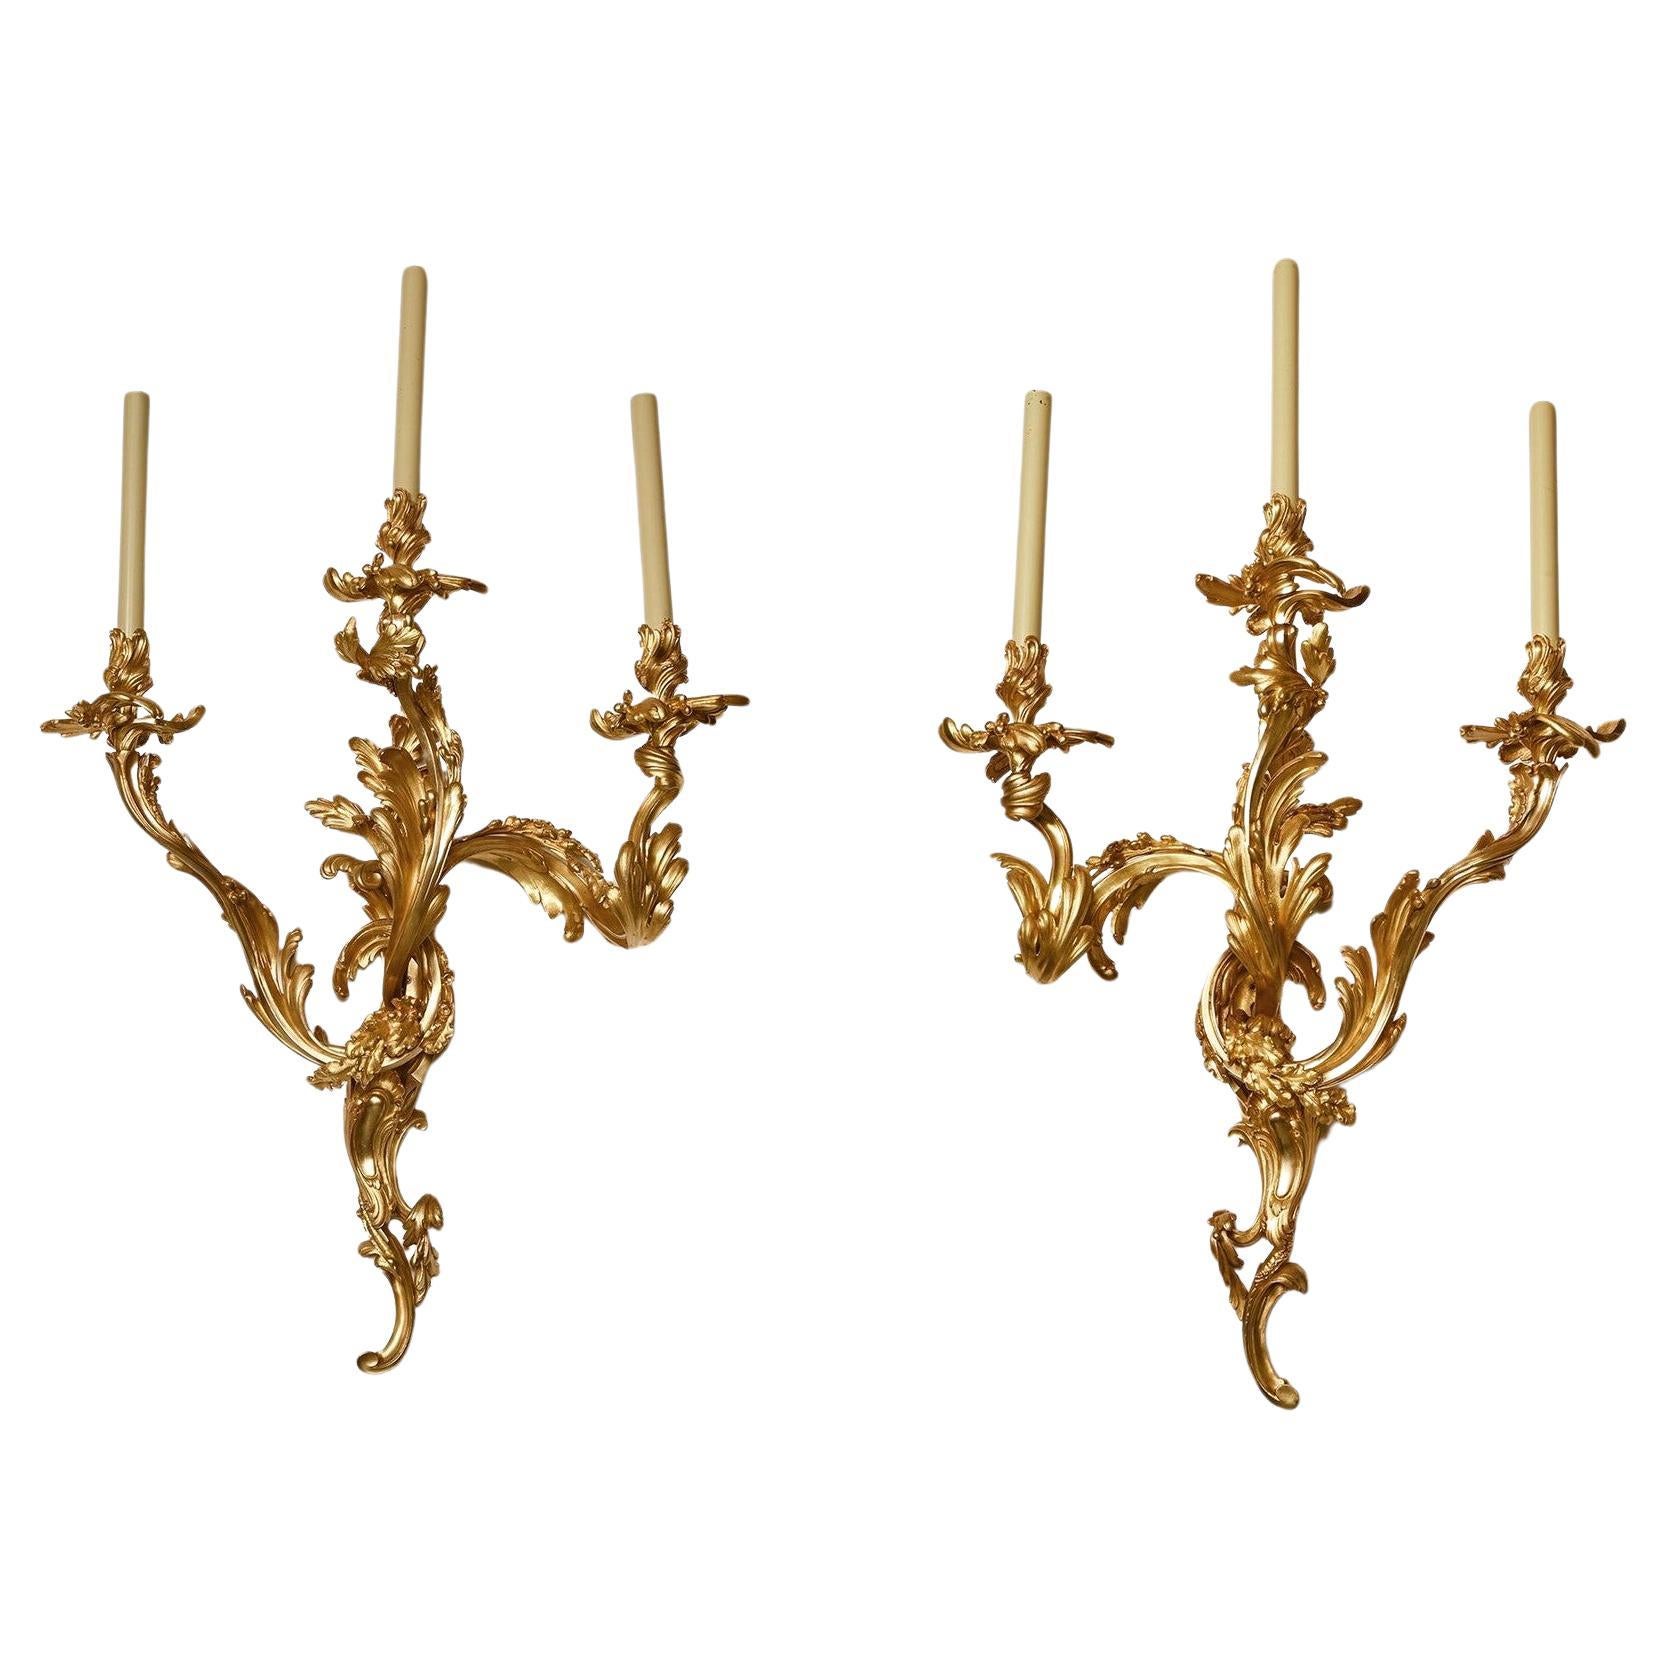 Pair of Large 19th Century French Three Branch Ormolu Wall Lights or Appliqués